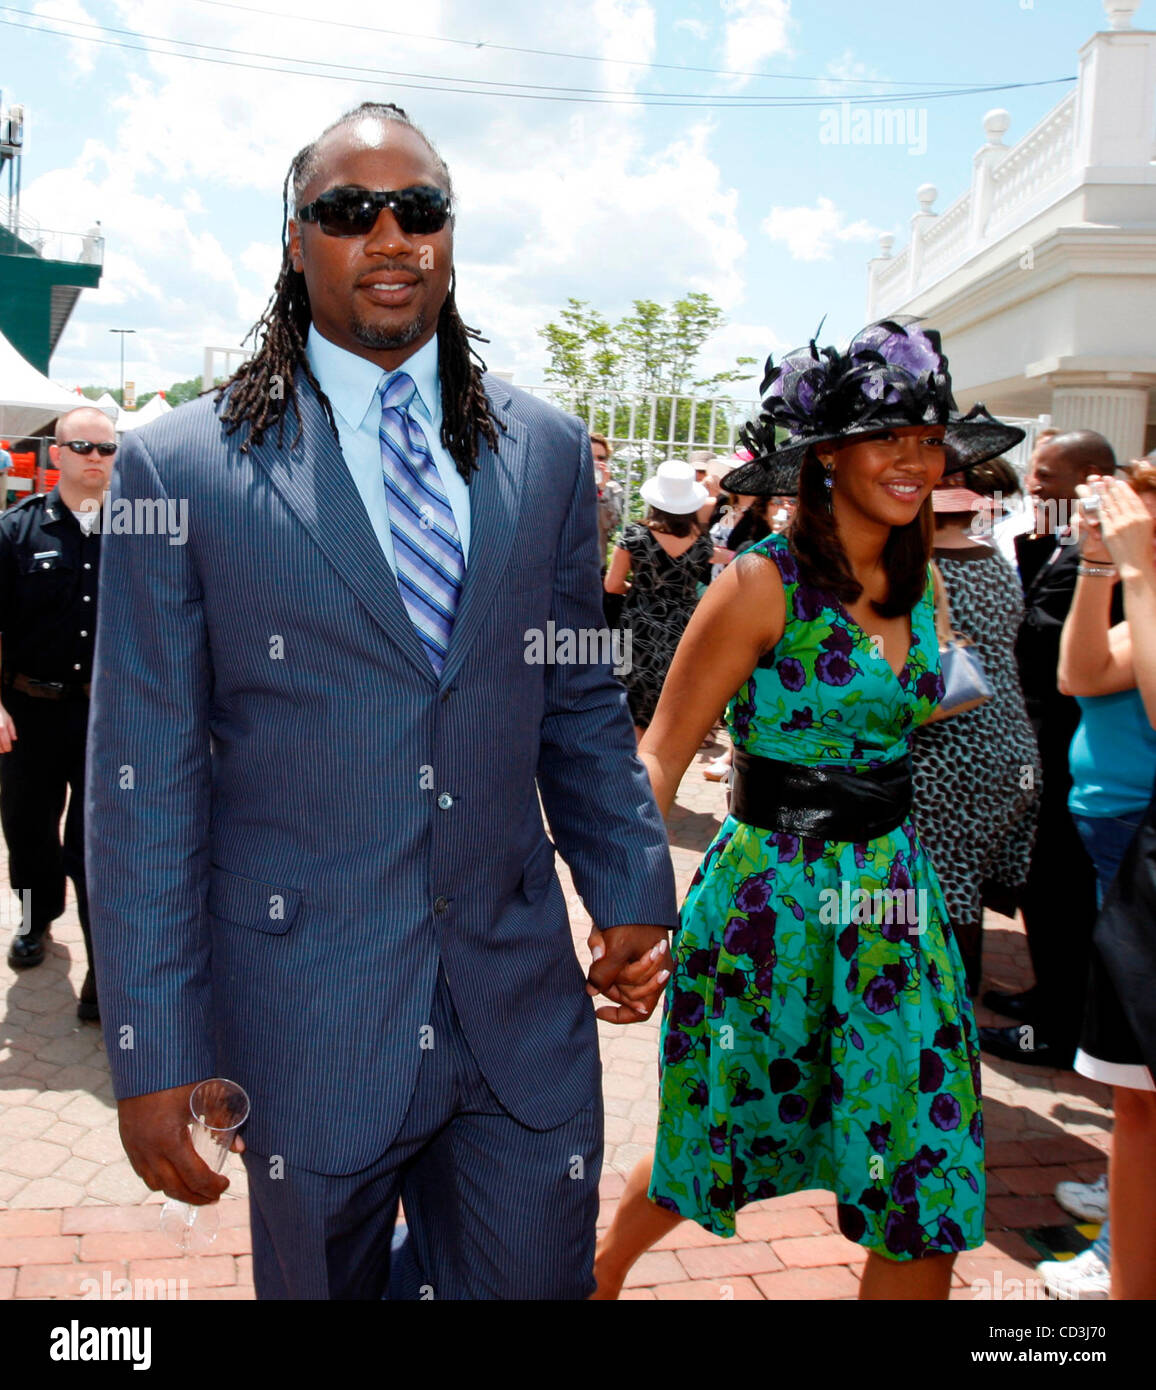 Boxer Lennox Lewis and wife Violet, arrived at the 134th running of the Kentucky Derby Saturday May 3, 2008, at Churchill Downs, Louisville, Ky. Photo by Charles Bertram Stock Photo